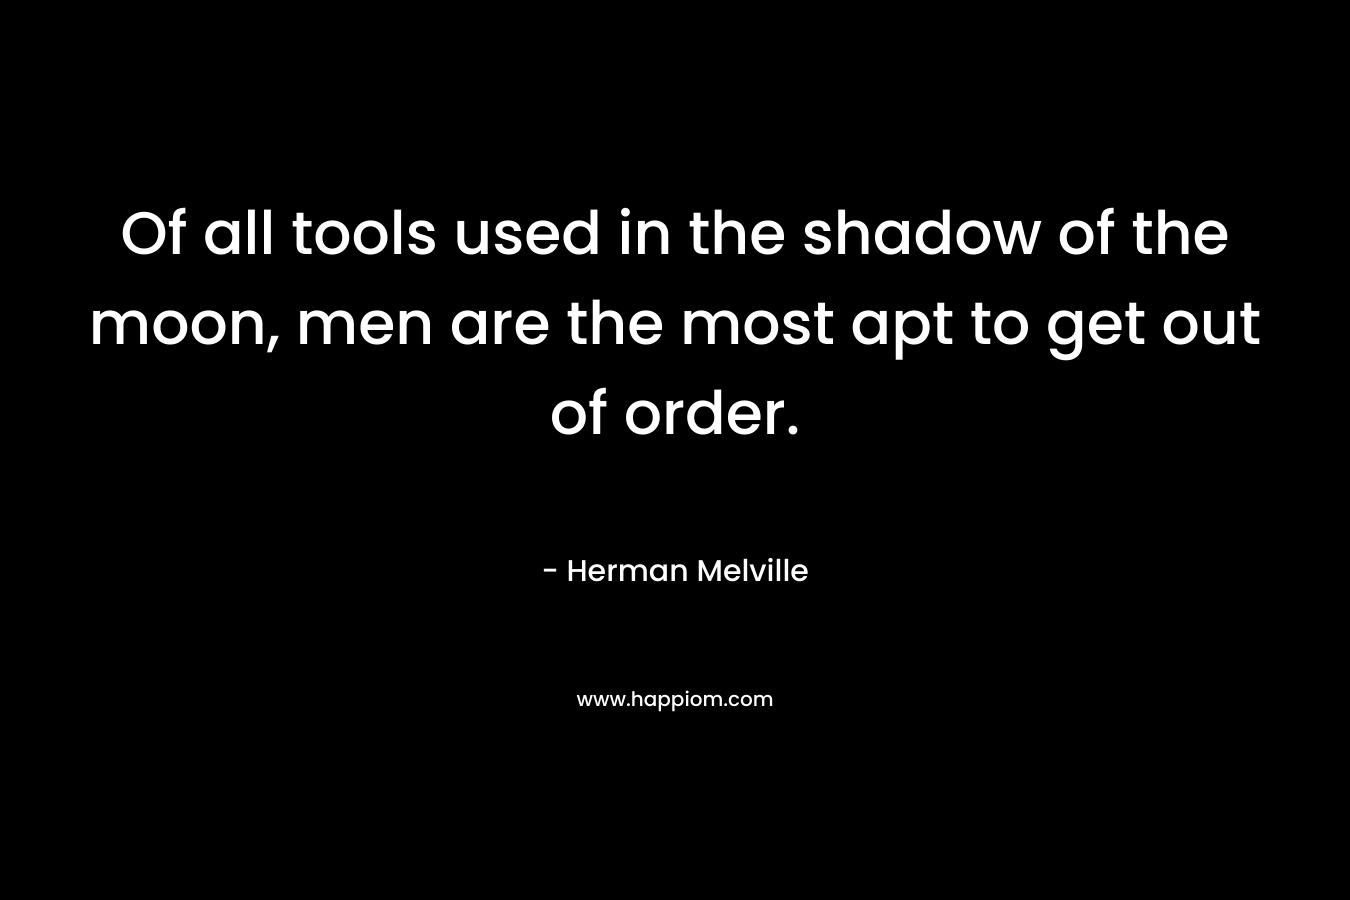 Of all tools used in the shadow of the moon, men are the most apt to get out of order. – Herman Melville